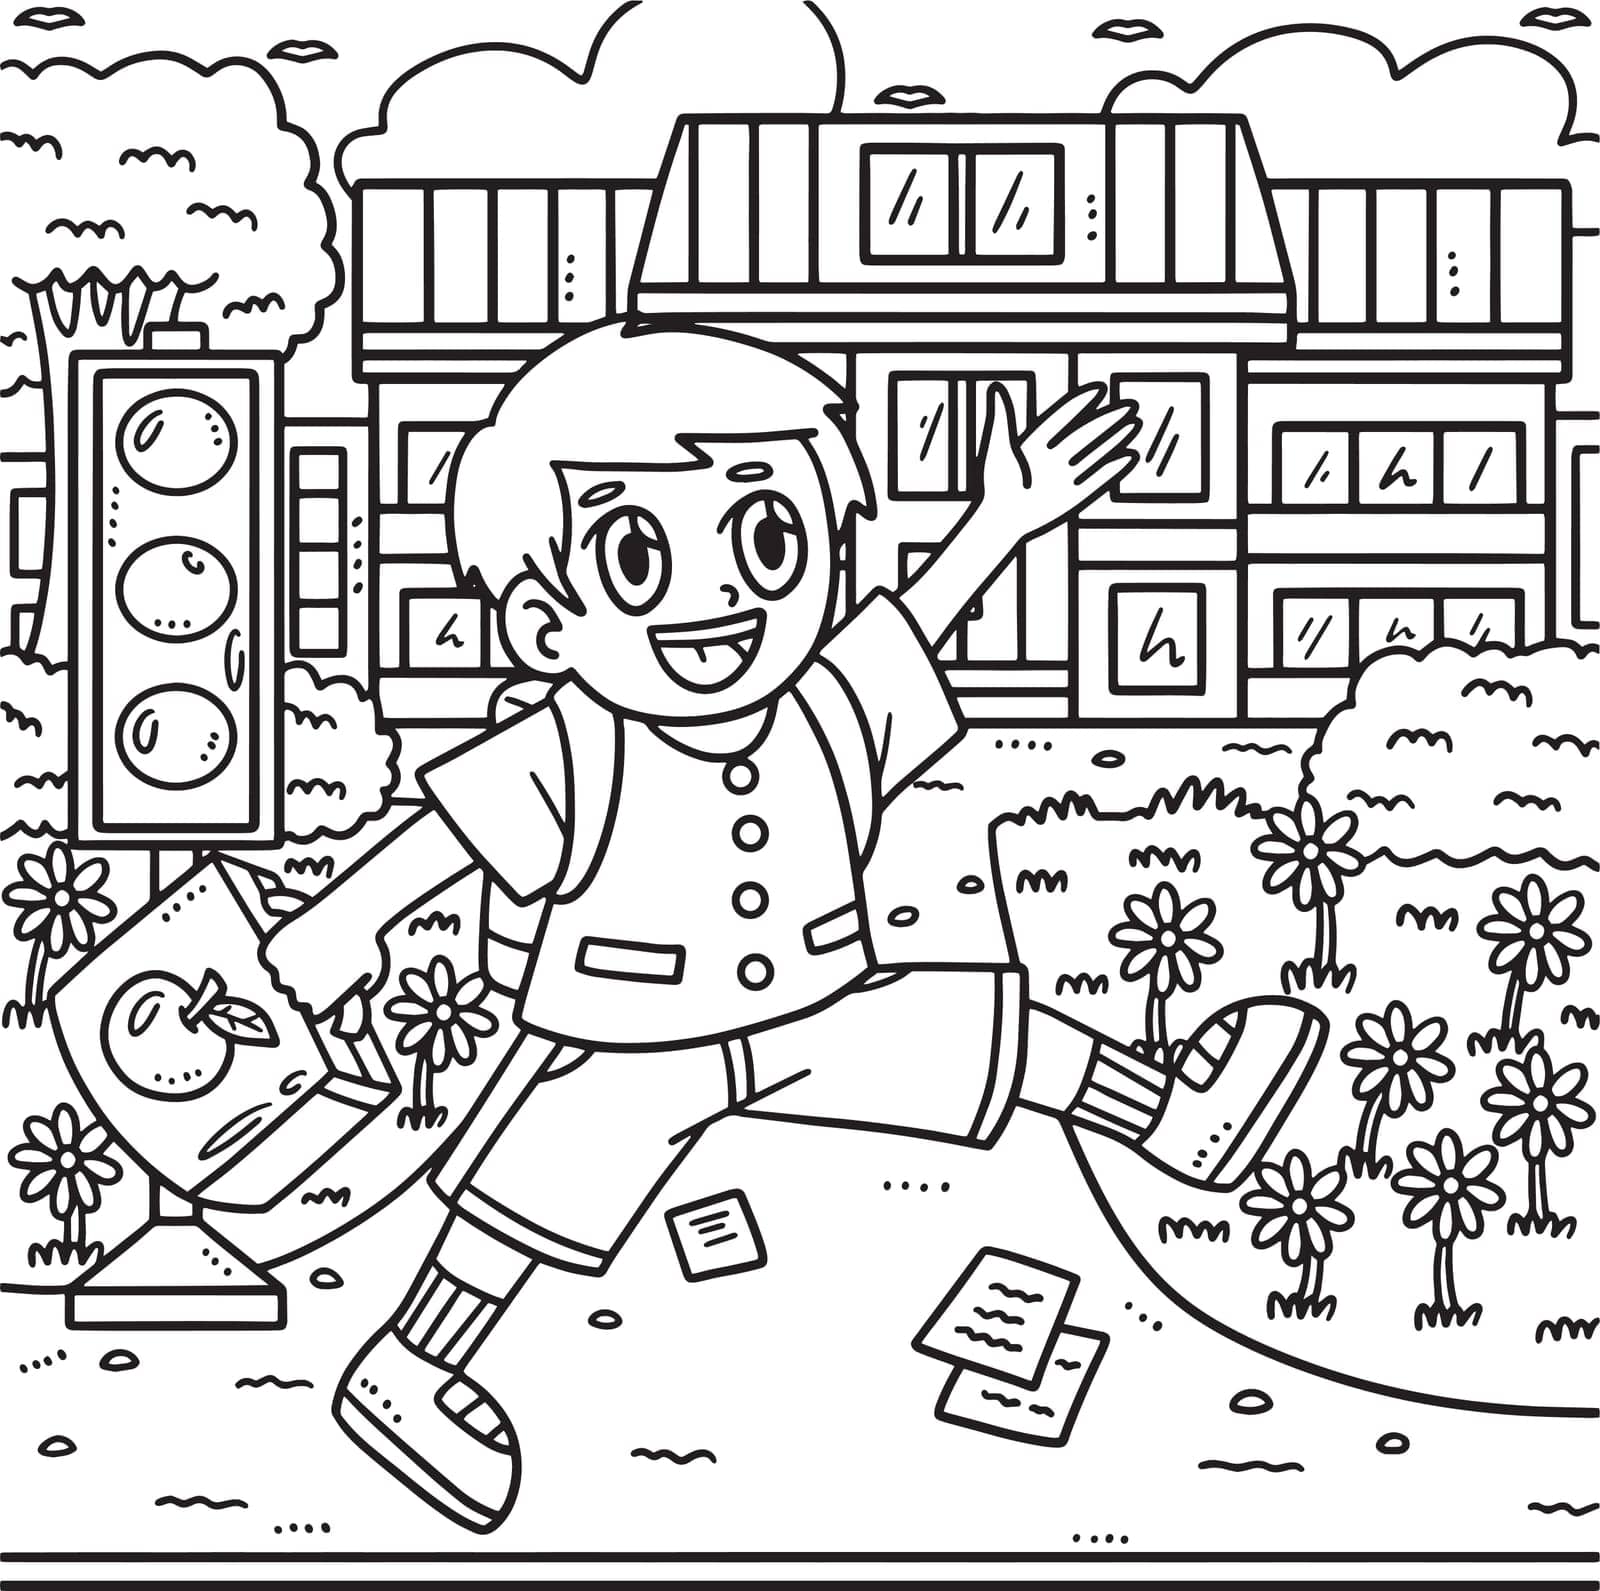 A cute and funny coloring page of a Student going to school. Provides hours of coloring fun for children. Color, this page is very easy. Suitable for little kids and toddlers.